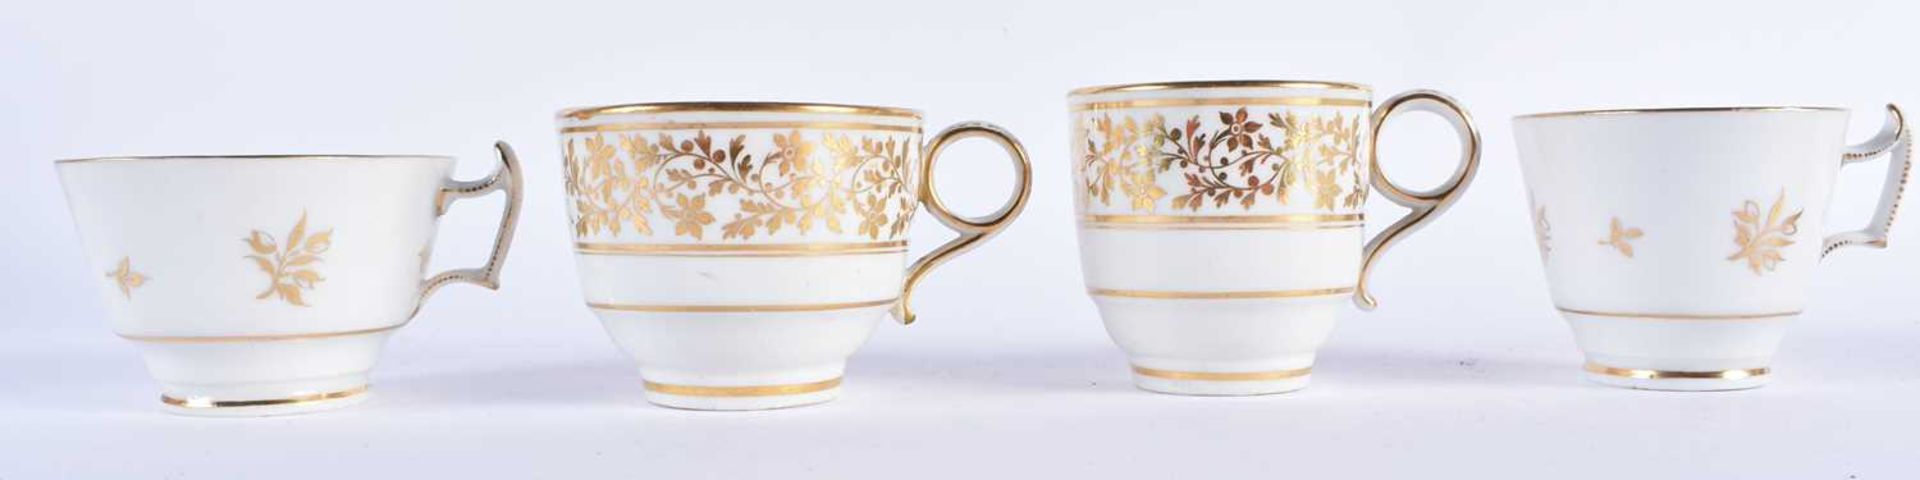 A LATE 18TH/19TH CENTURY CHAMBERLAINS WORCESTER GILT PAINTED TEAWARES. Largest 8 cm x 15 cm. (qty) - Image 11 of 13